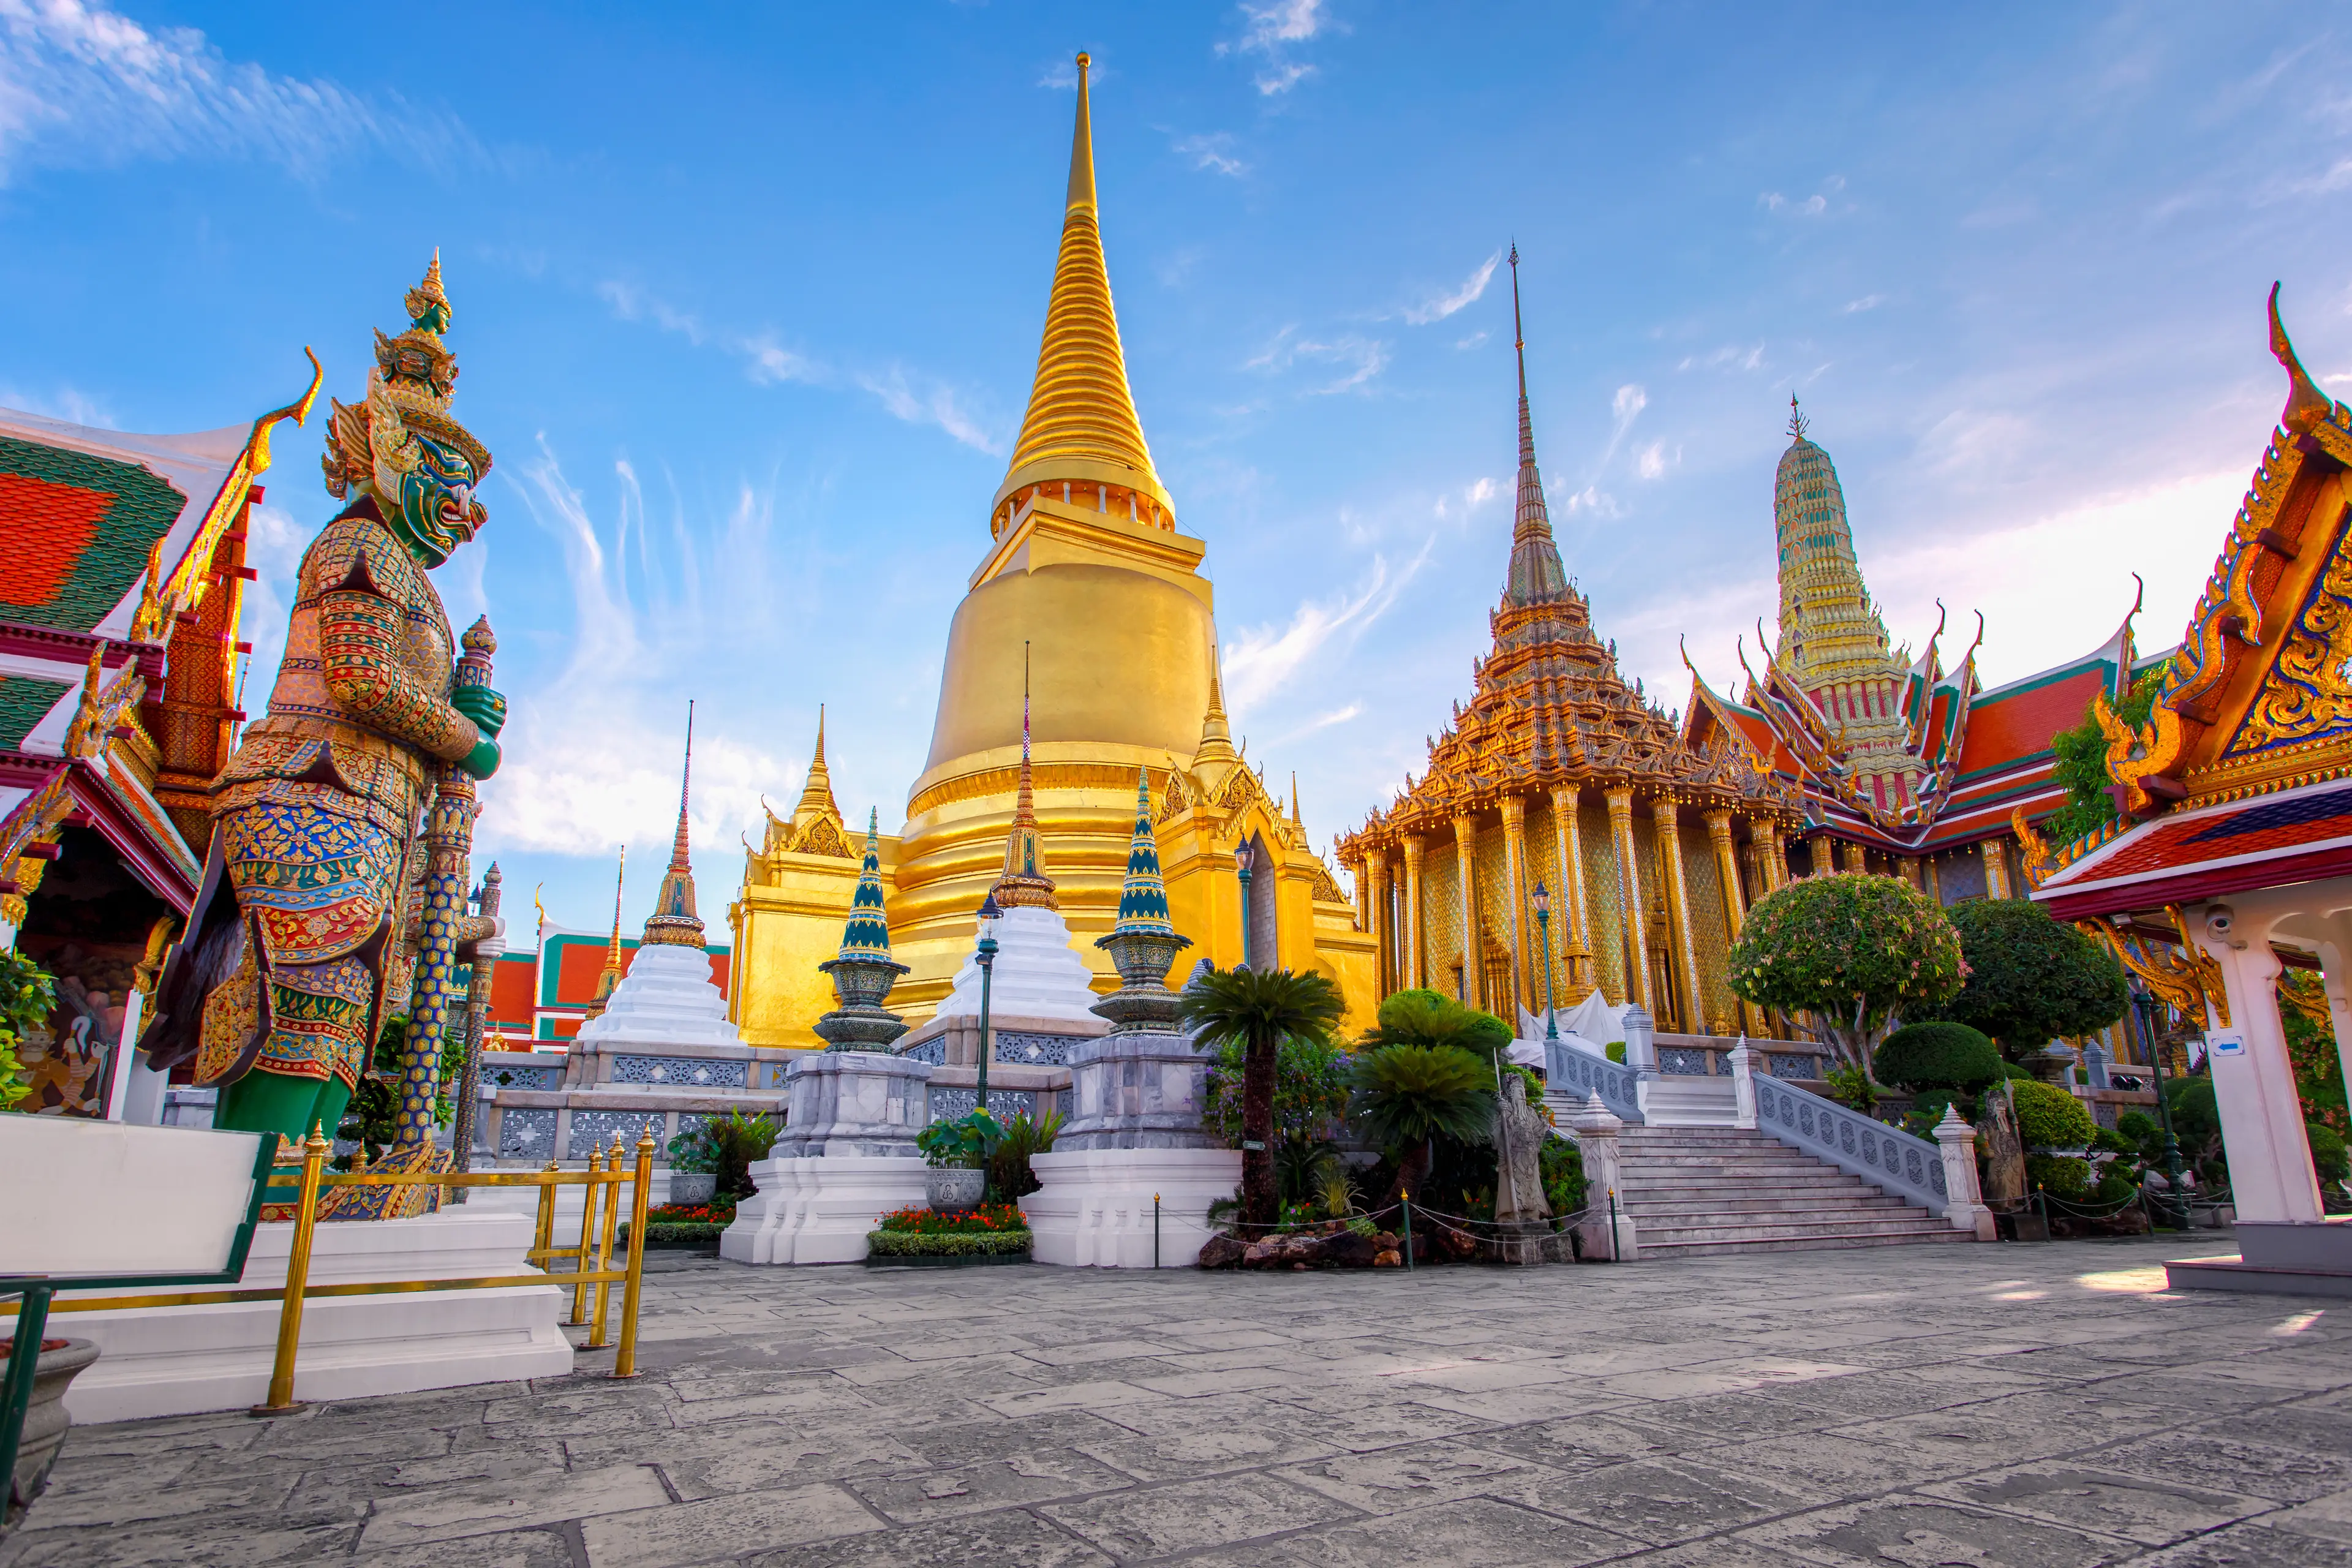 3-Day Lone Adventure: Sightseeing & Shopping in Bangkok Like a Local